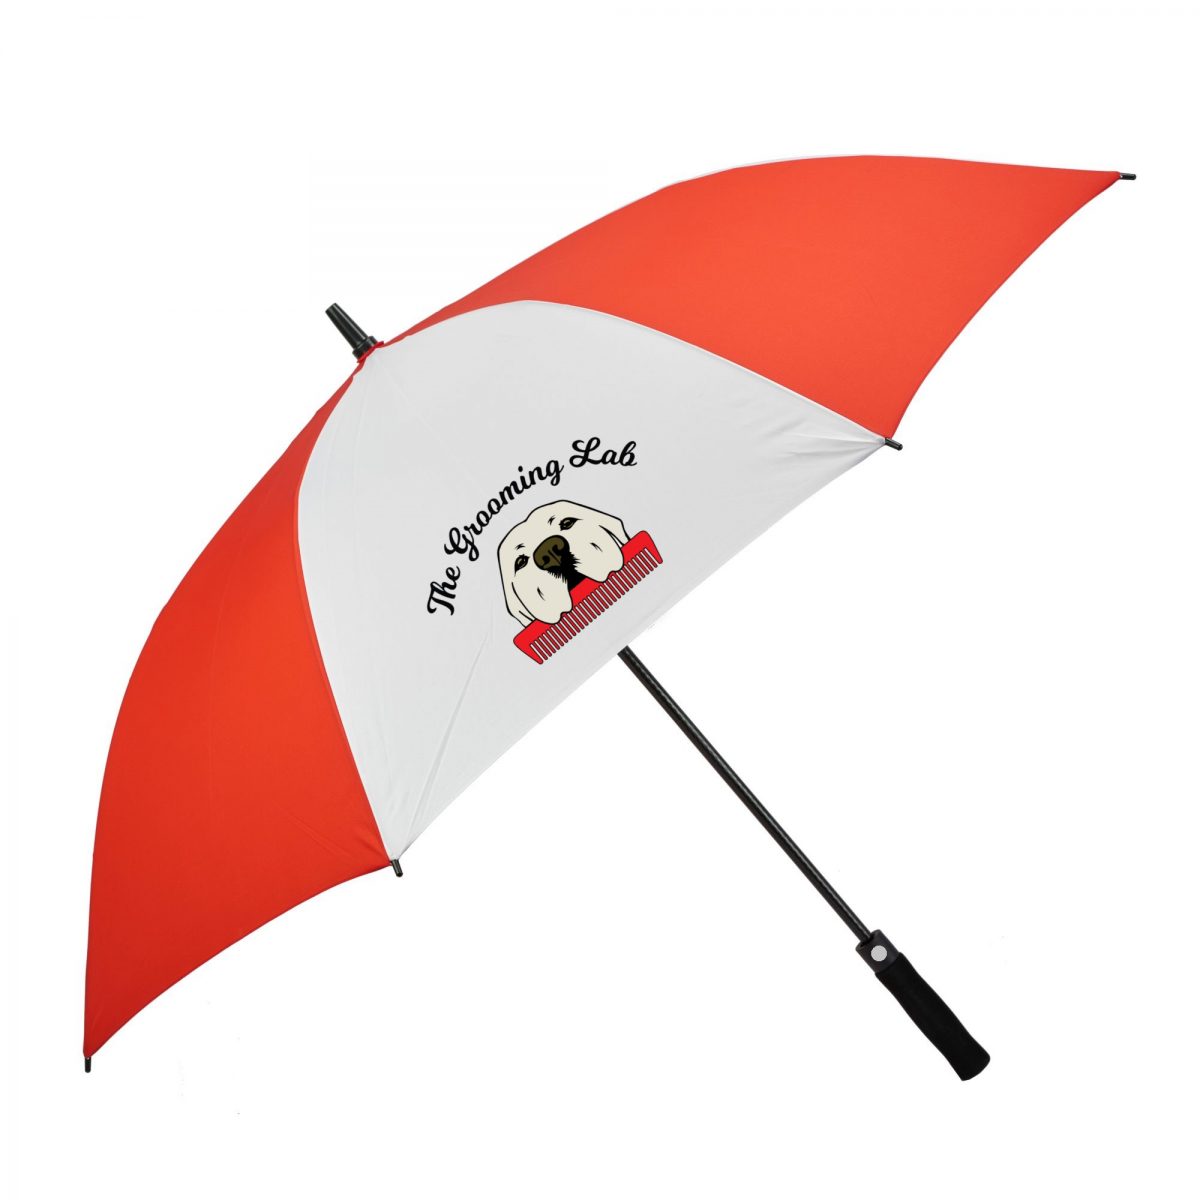 Custom printed umbrella in red and white alternating colours and branded with logo.